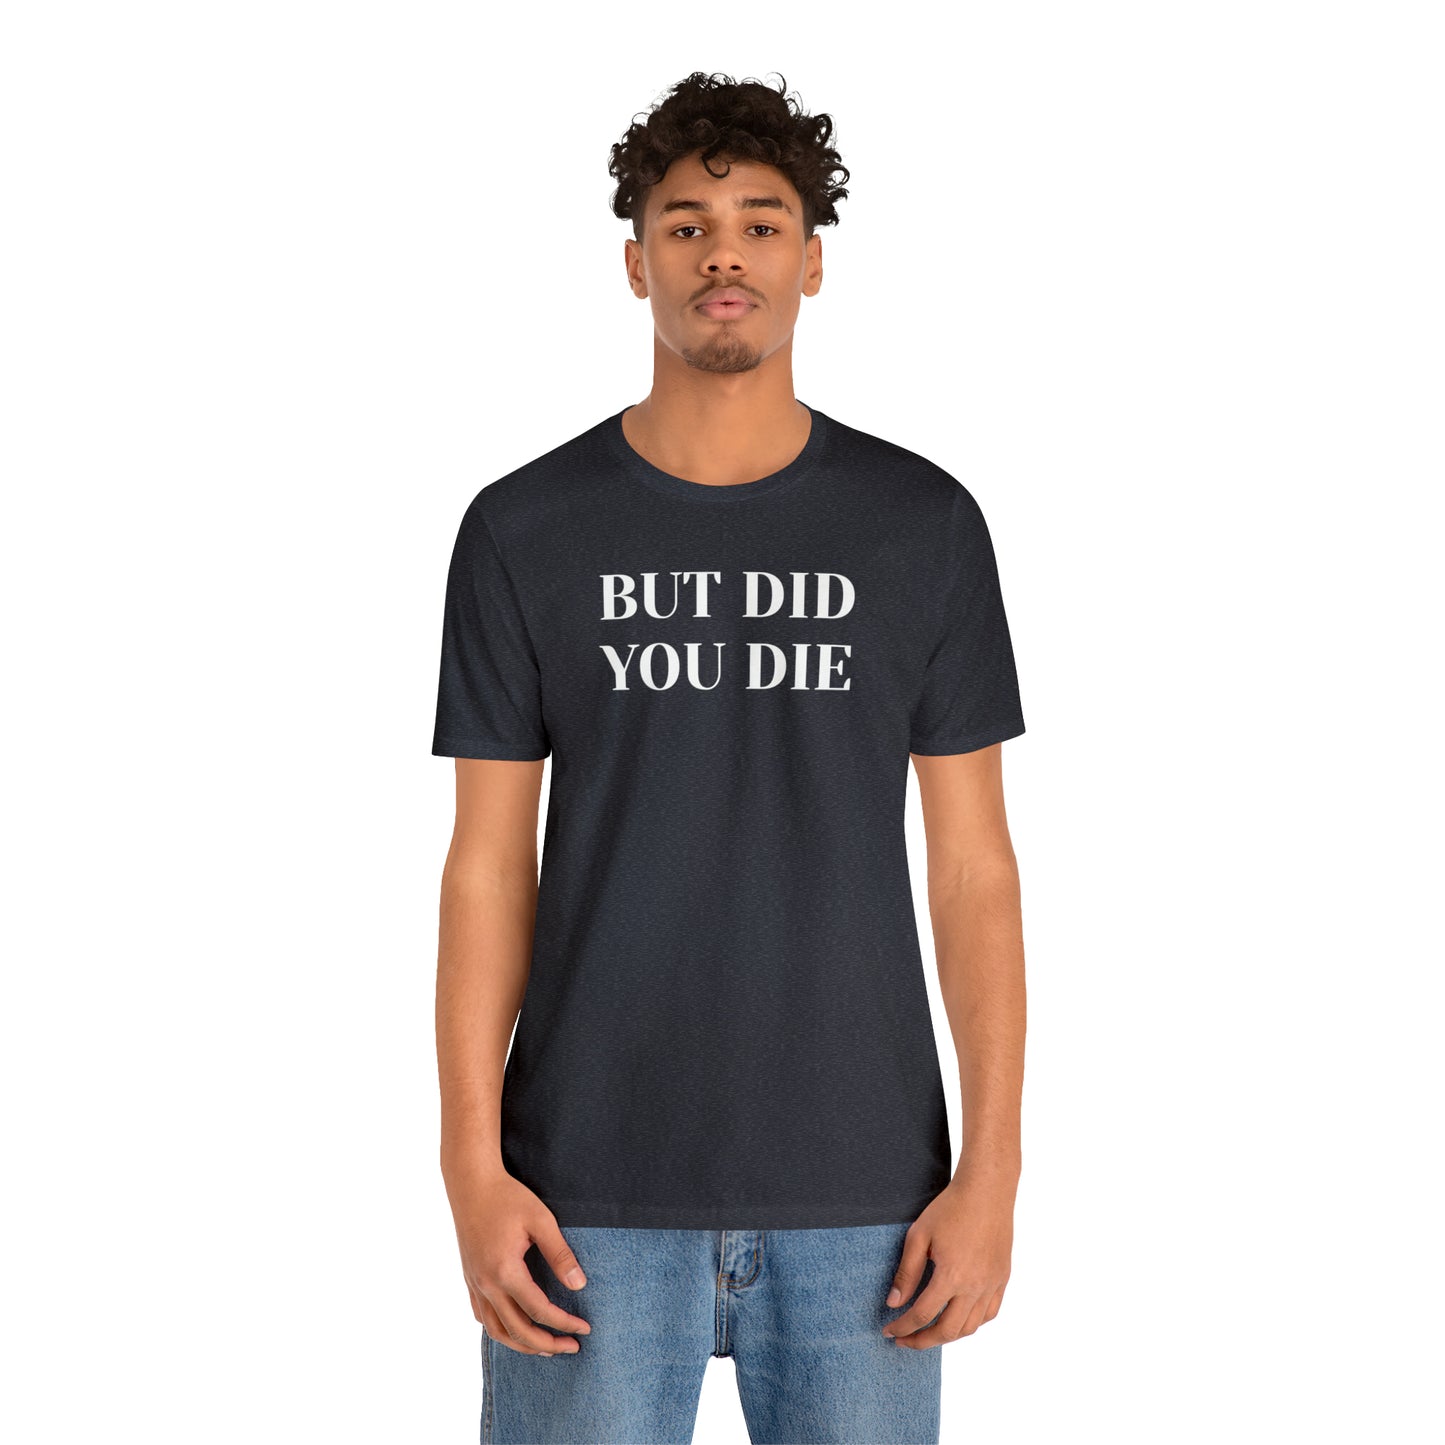 But Did You Die T-shirt Funny T-Shirt